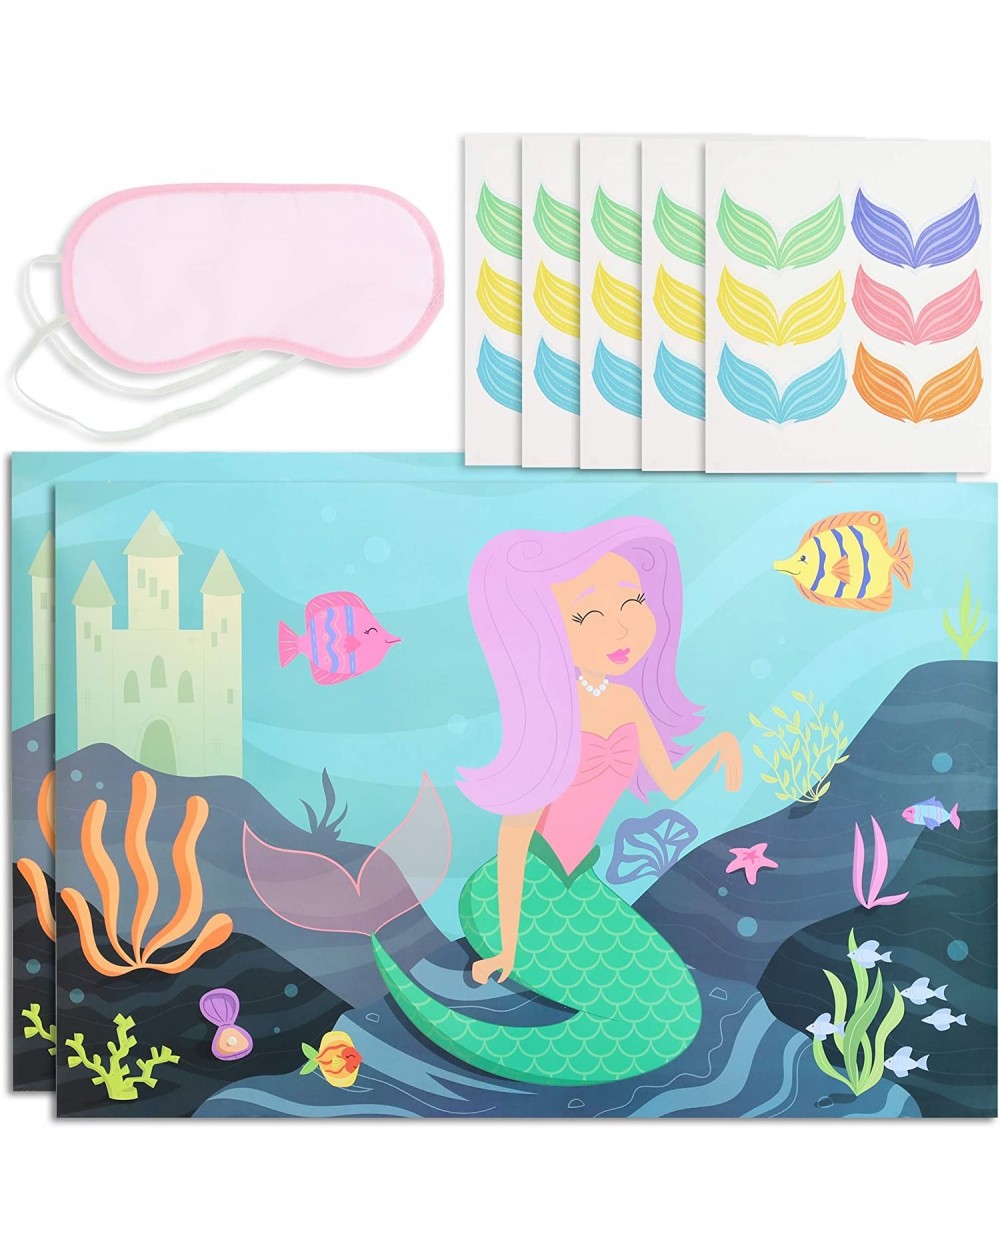 Party Favors Pin The Tail Mermaid Party Game (2 Pack) - CQ18SO6CE5D $8.68